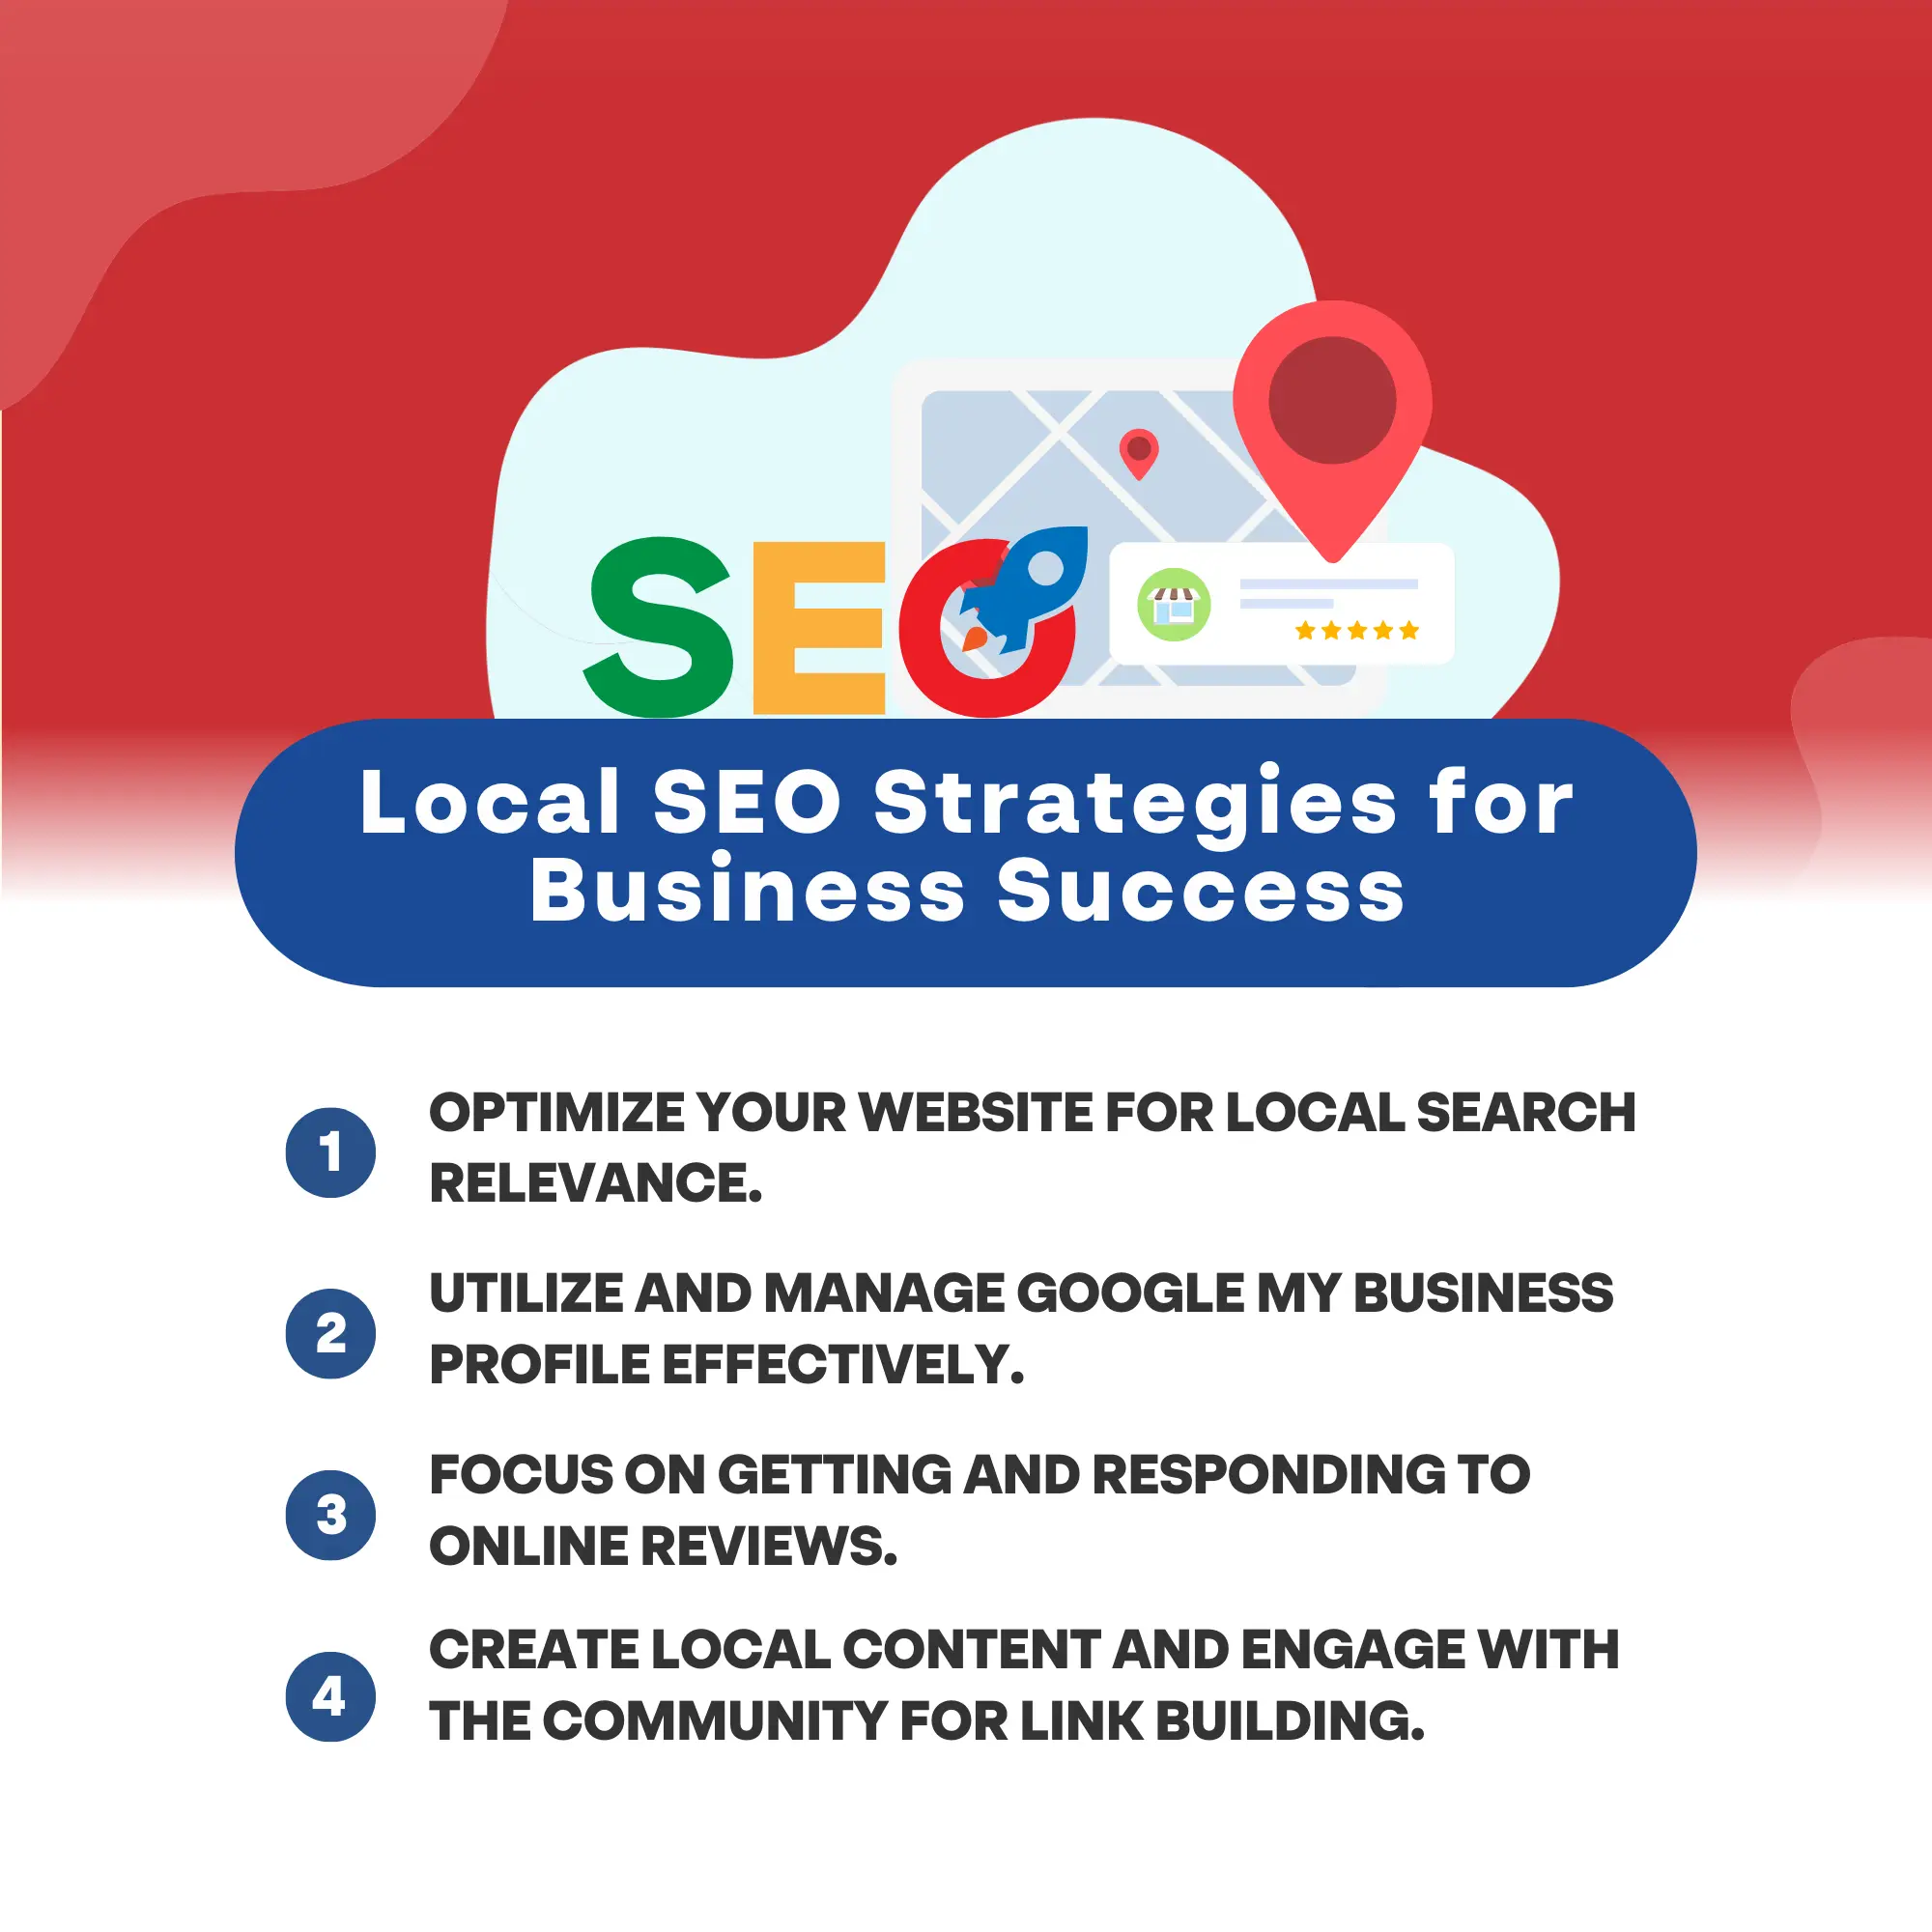 Local SEO Strategies for Business Success